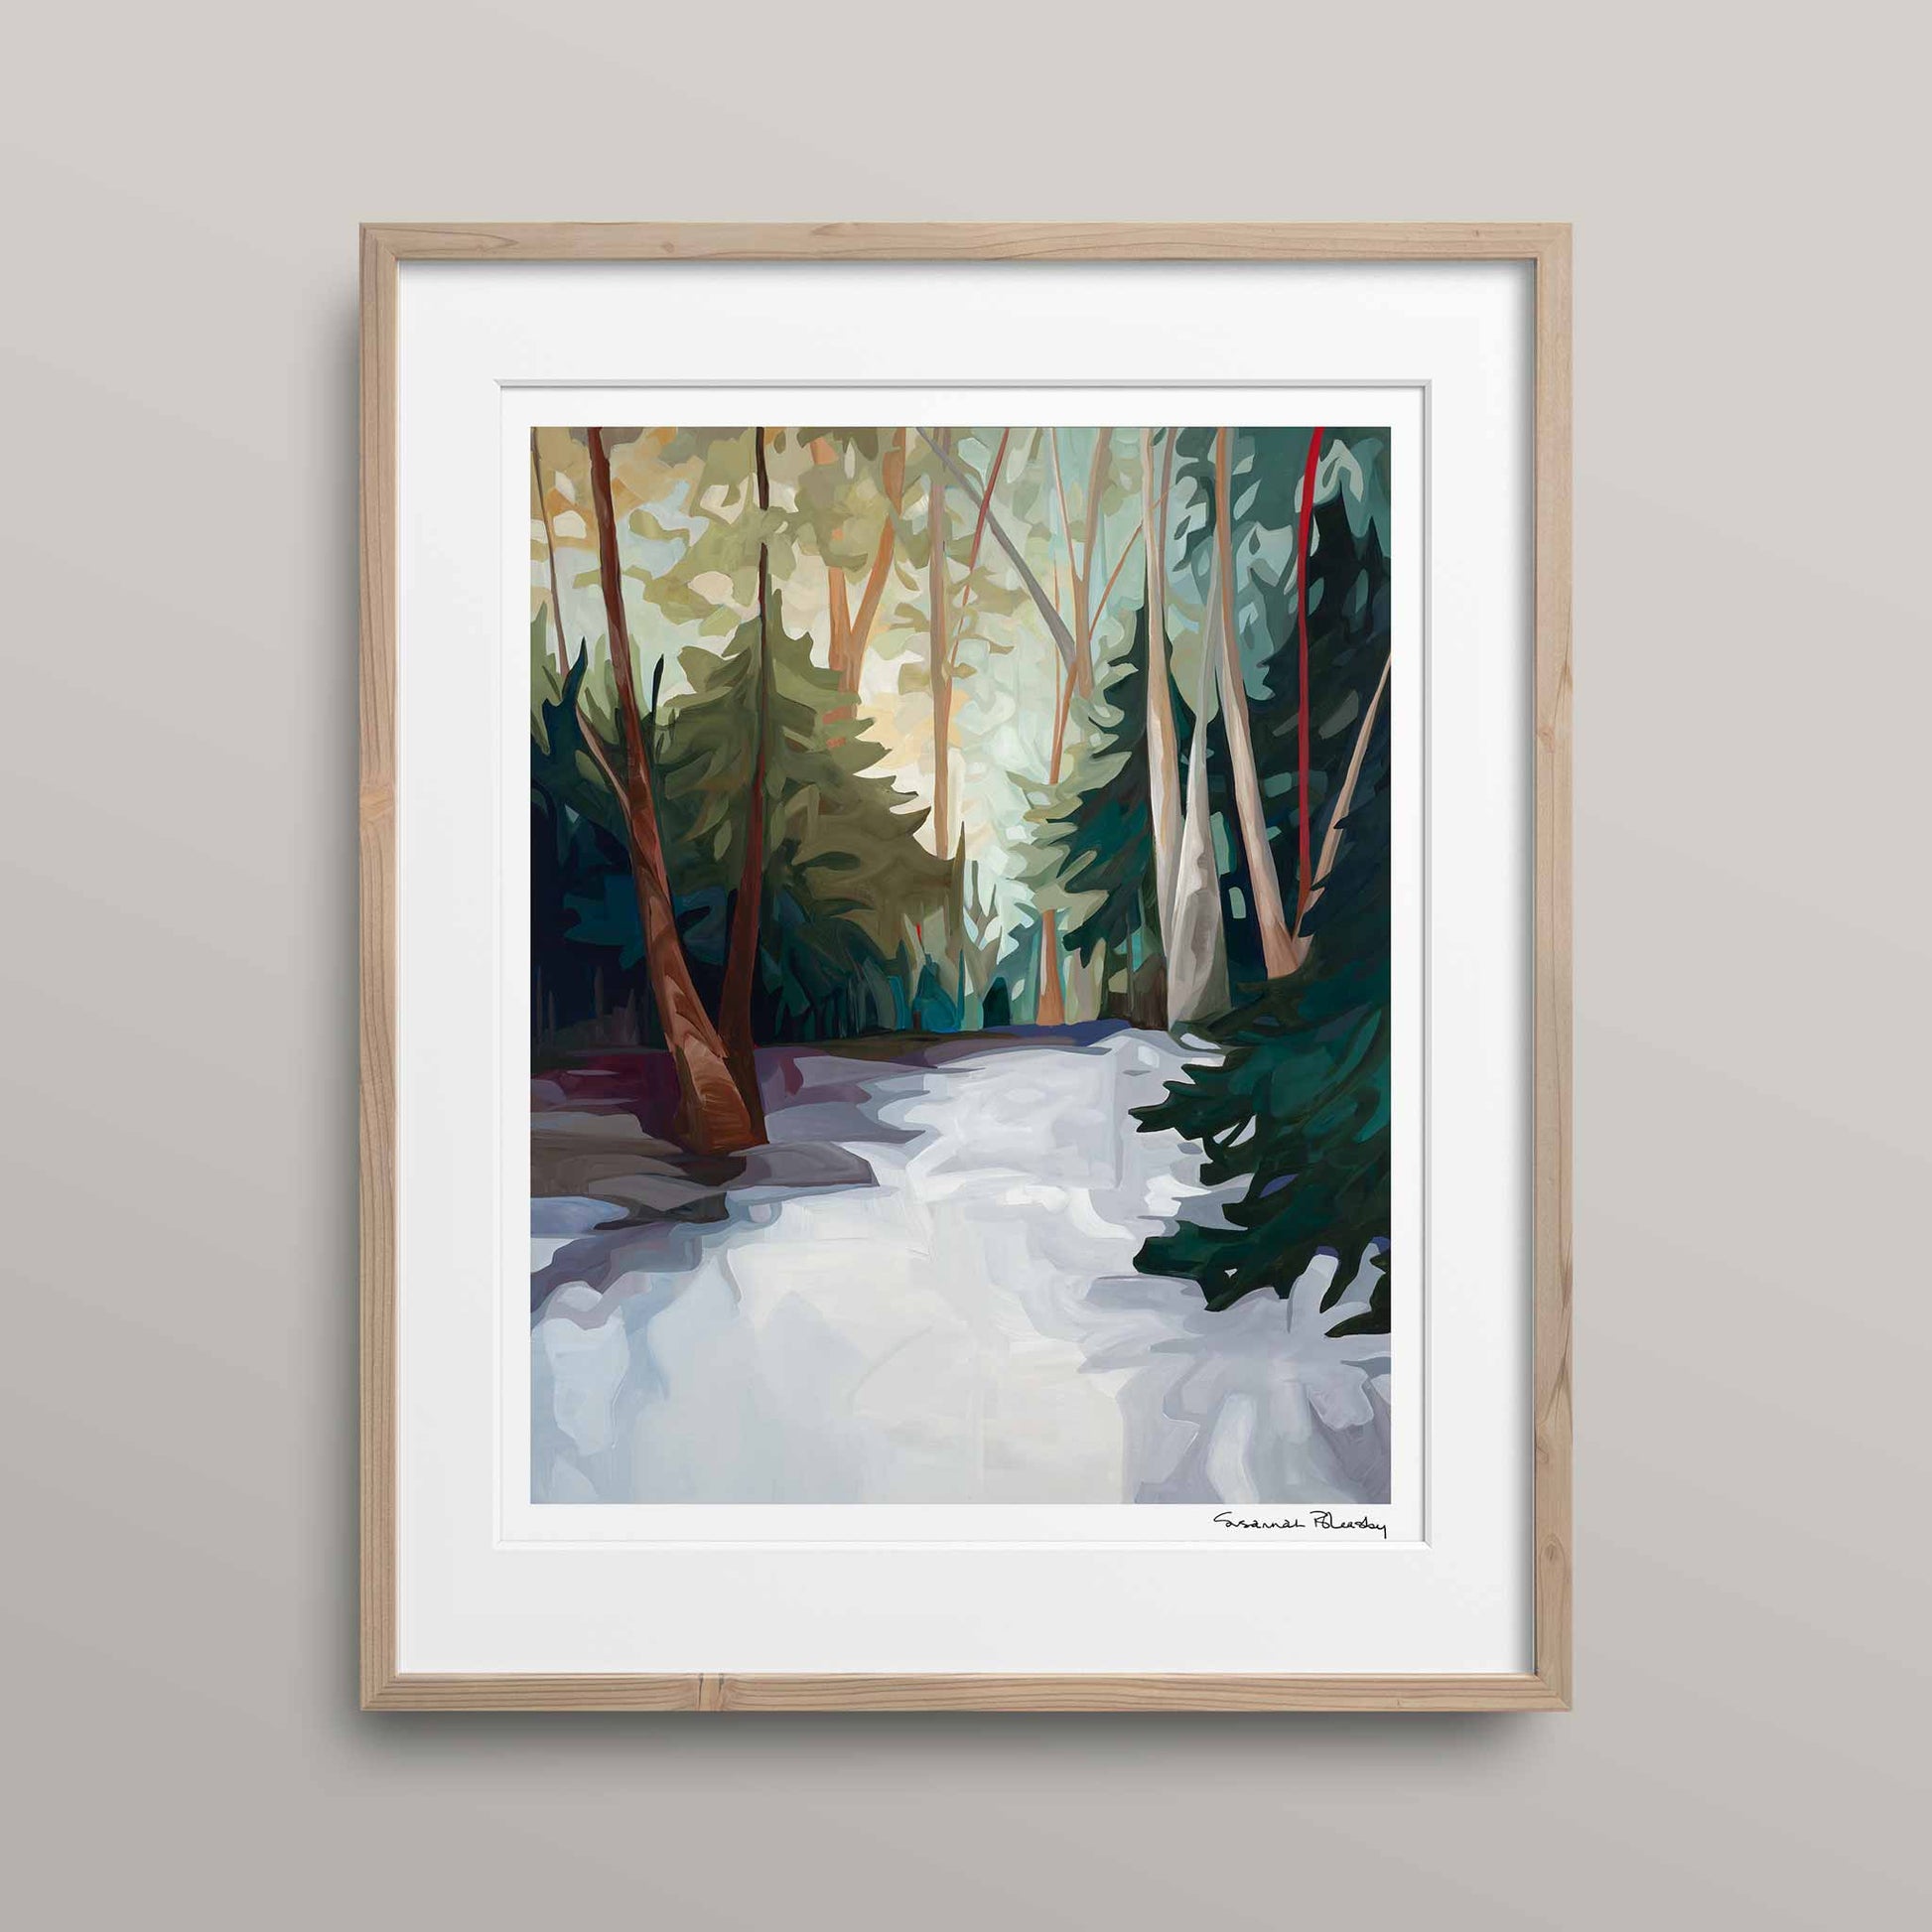 Painting print of an abstract forest landscape by Canadian artist Susannah Bleasby